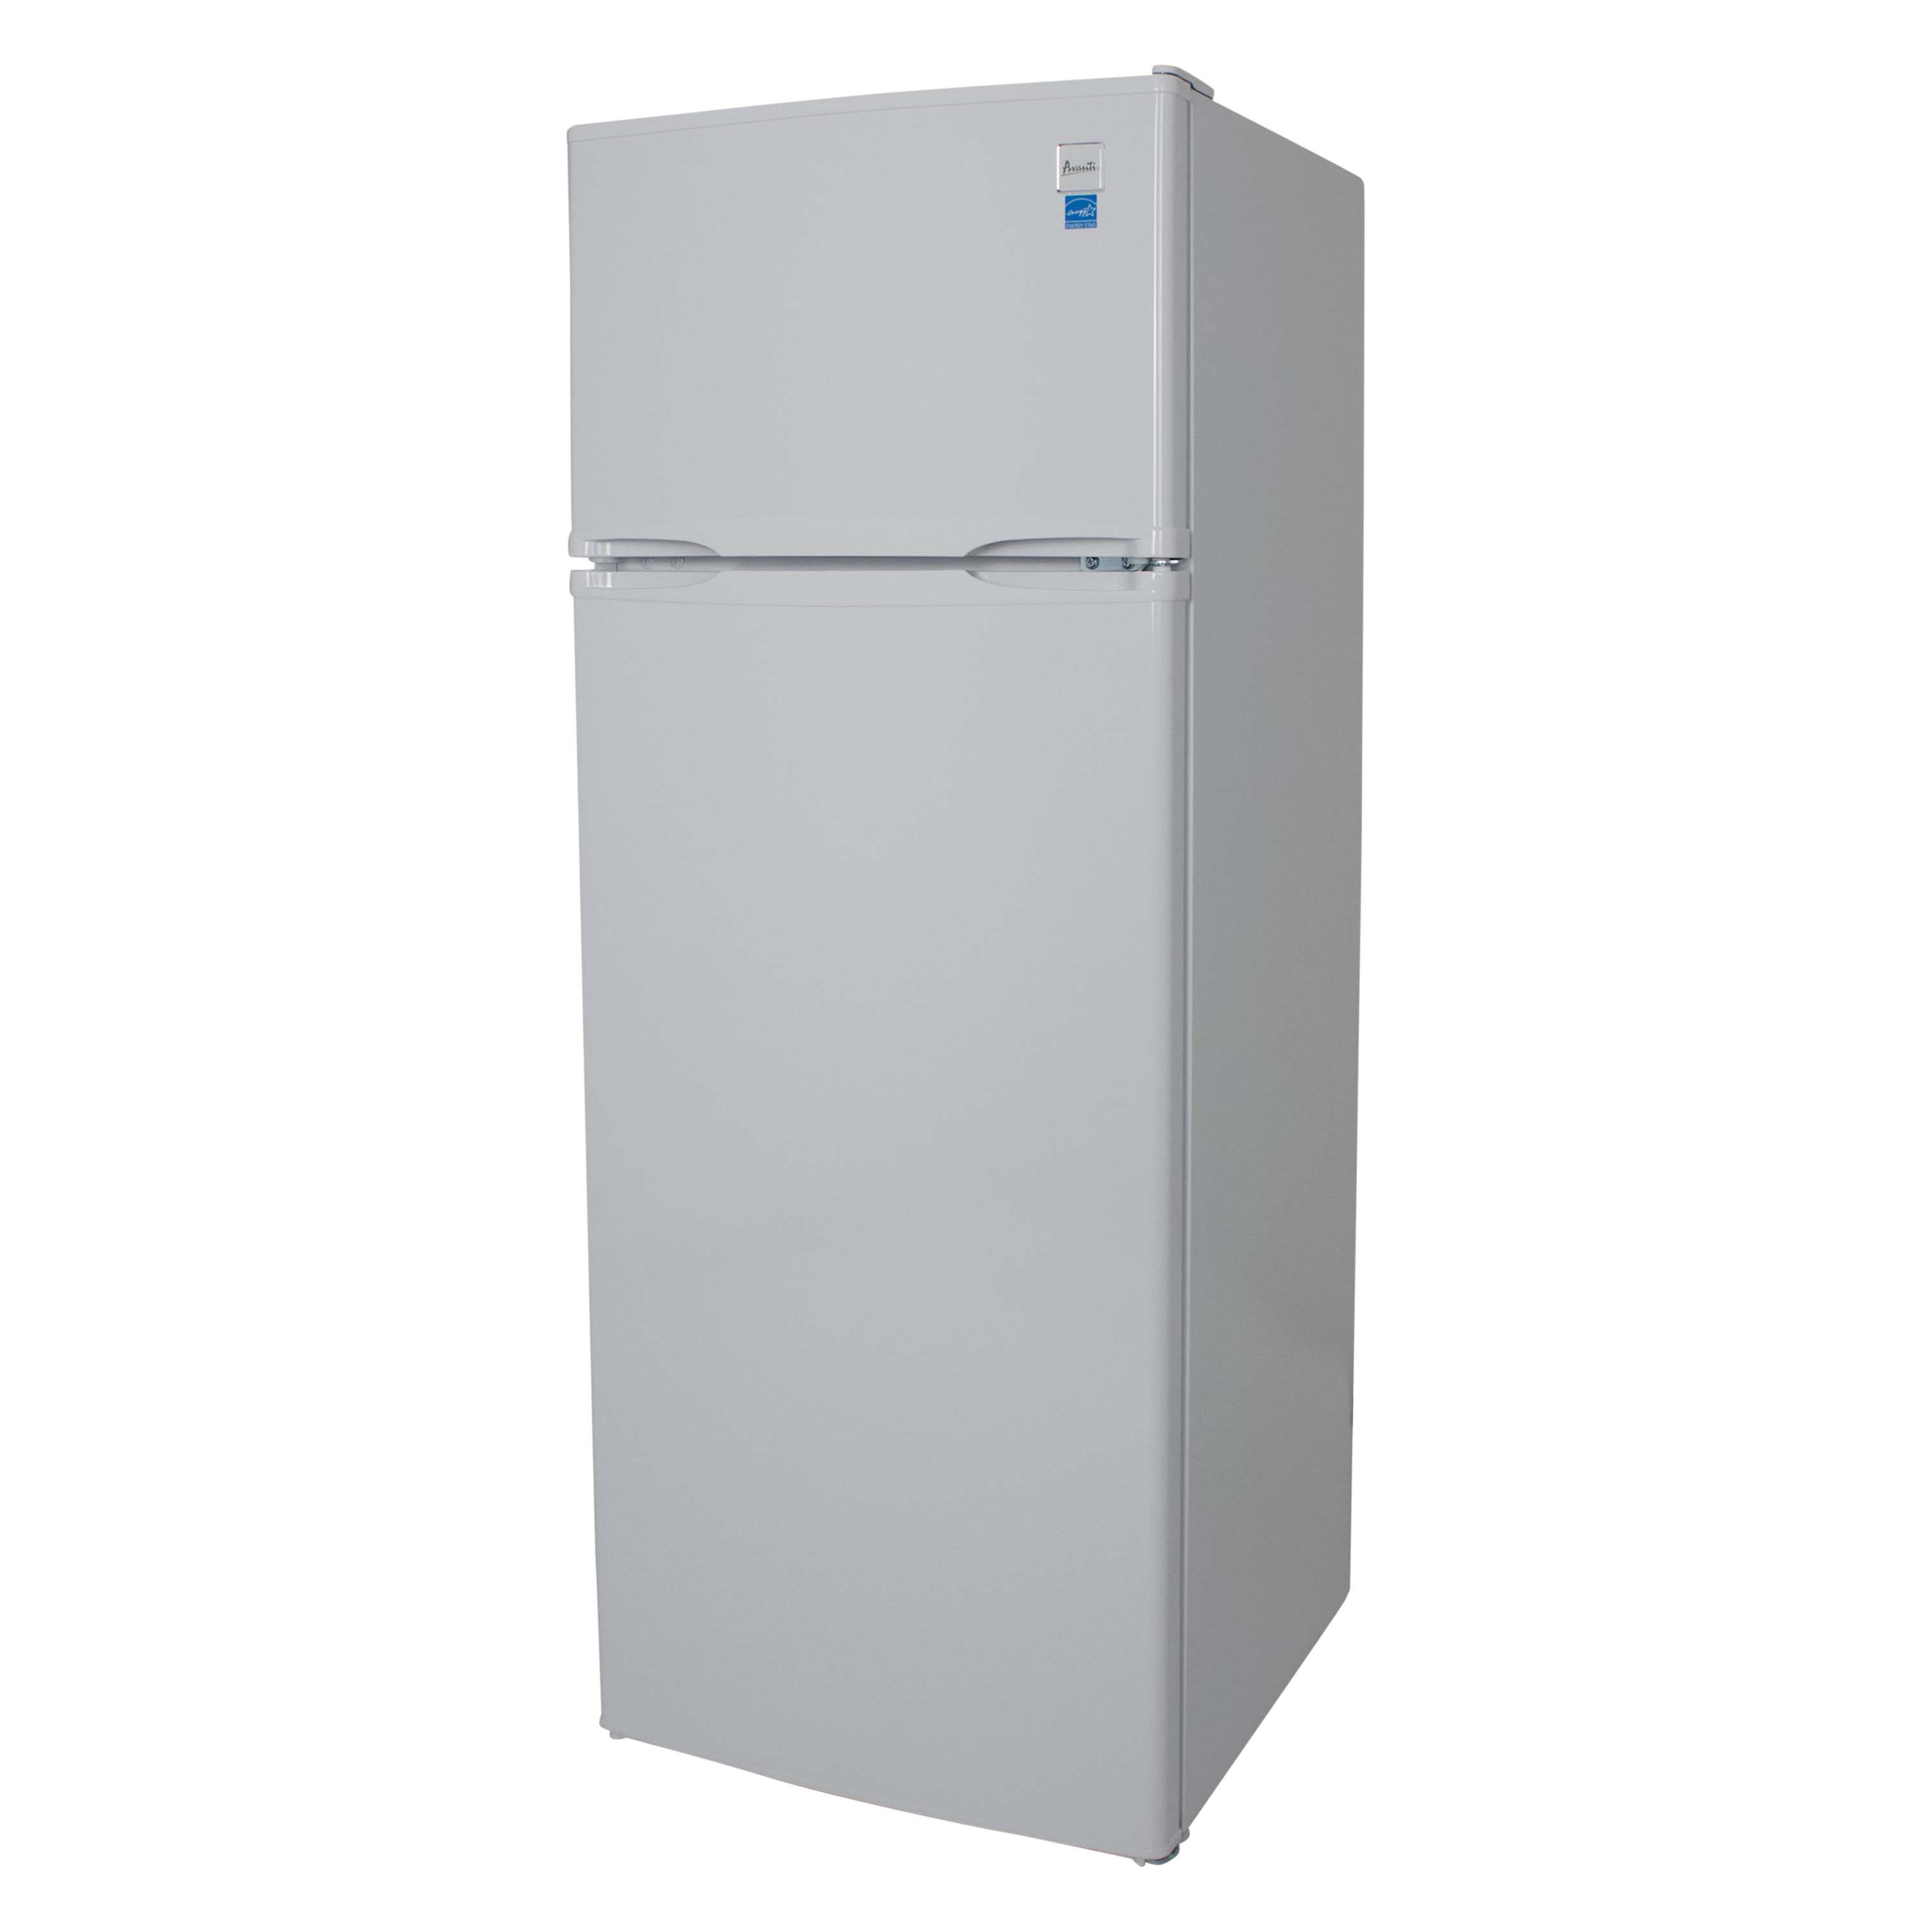 Magic Cool 10.0 Cu. ft. Apartment Size Refrigerator - Stainless Steel